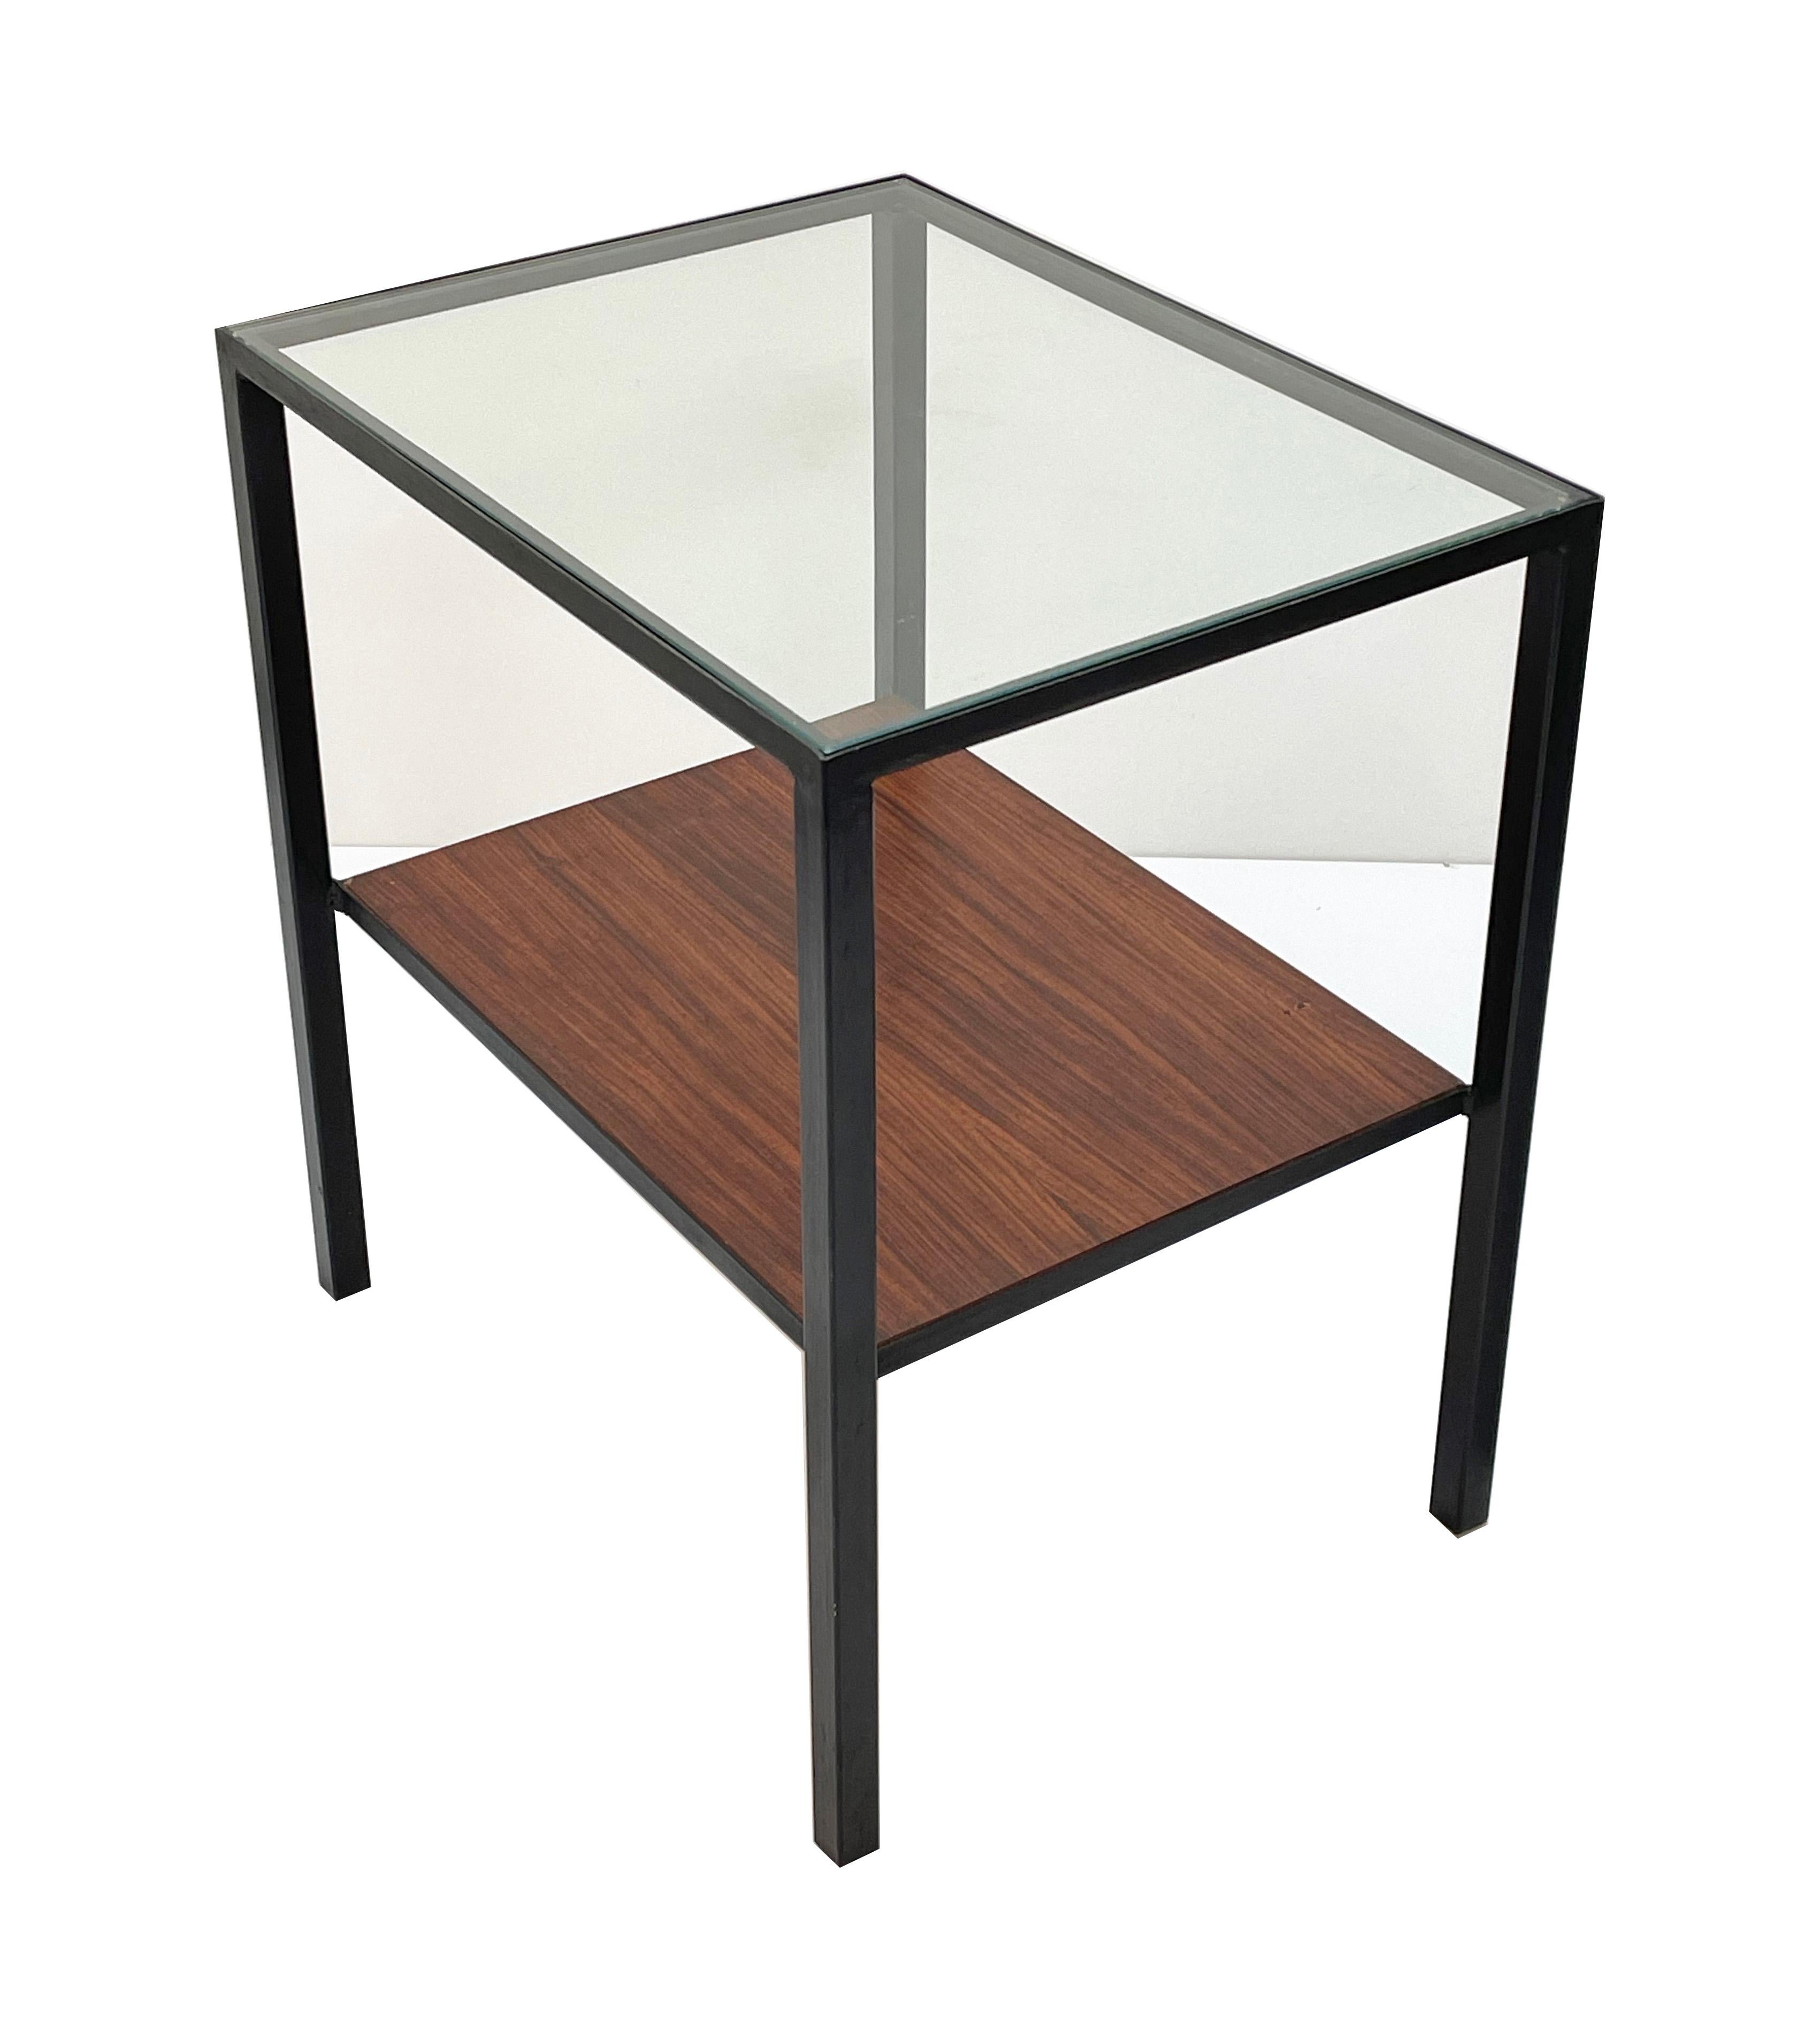 Pair of Iron, Glass and Wood Italian Coffee Table with Two Shelves, 1960s For Sale 11